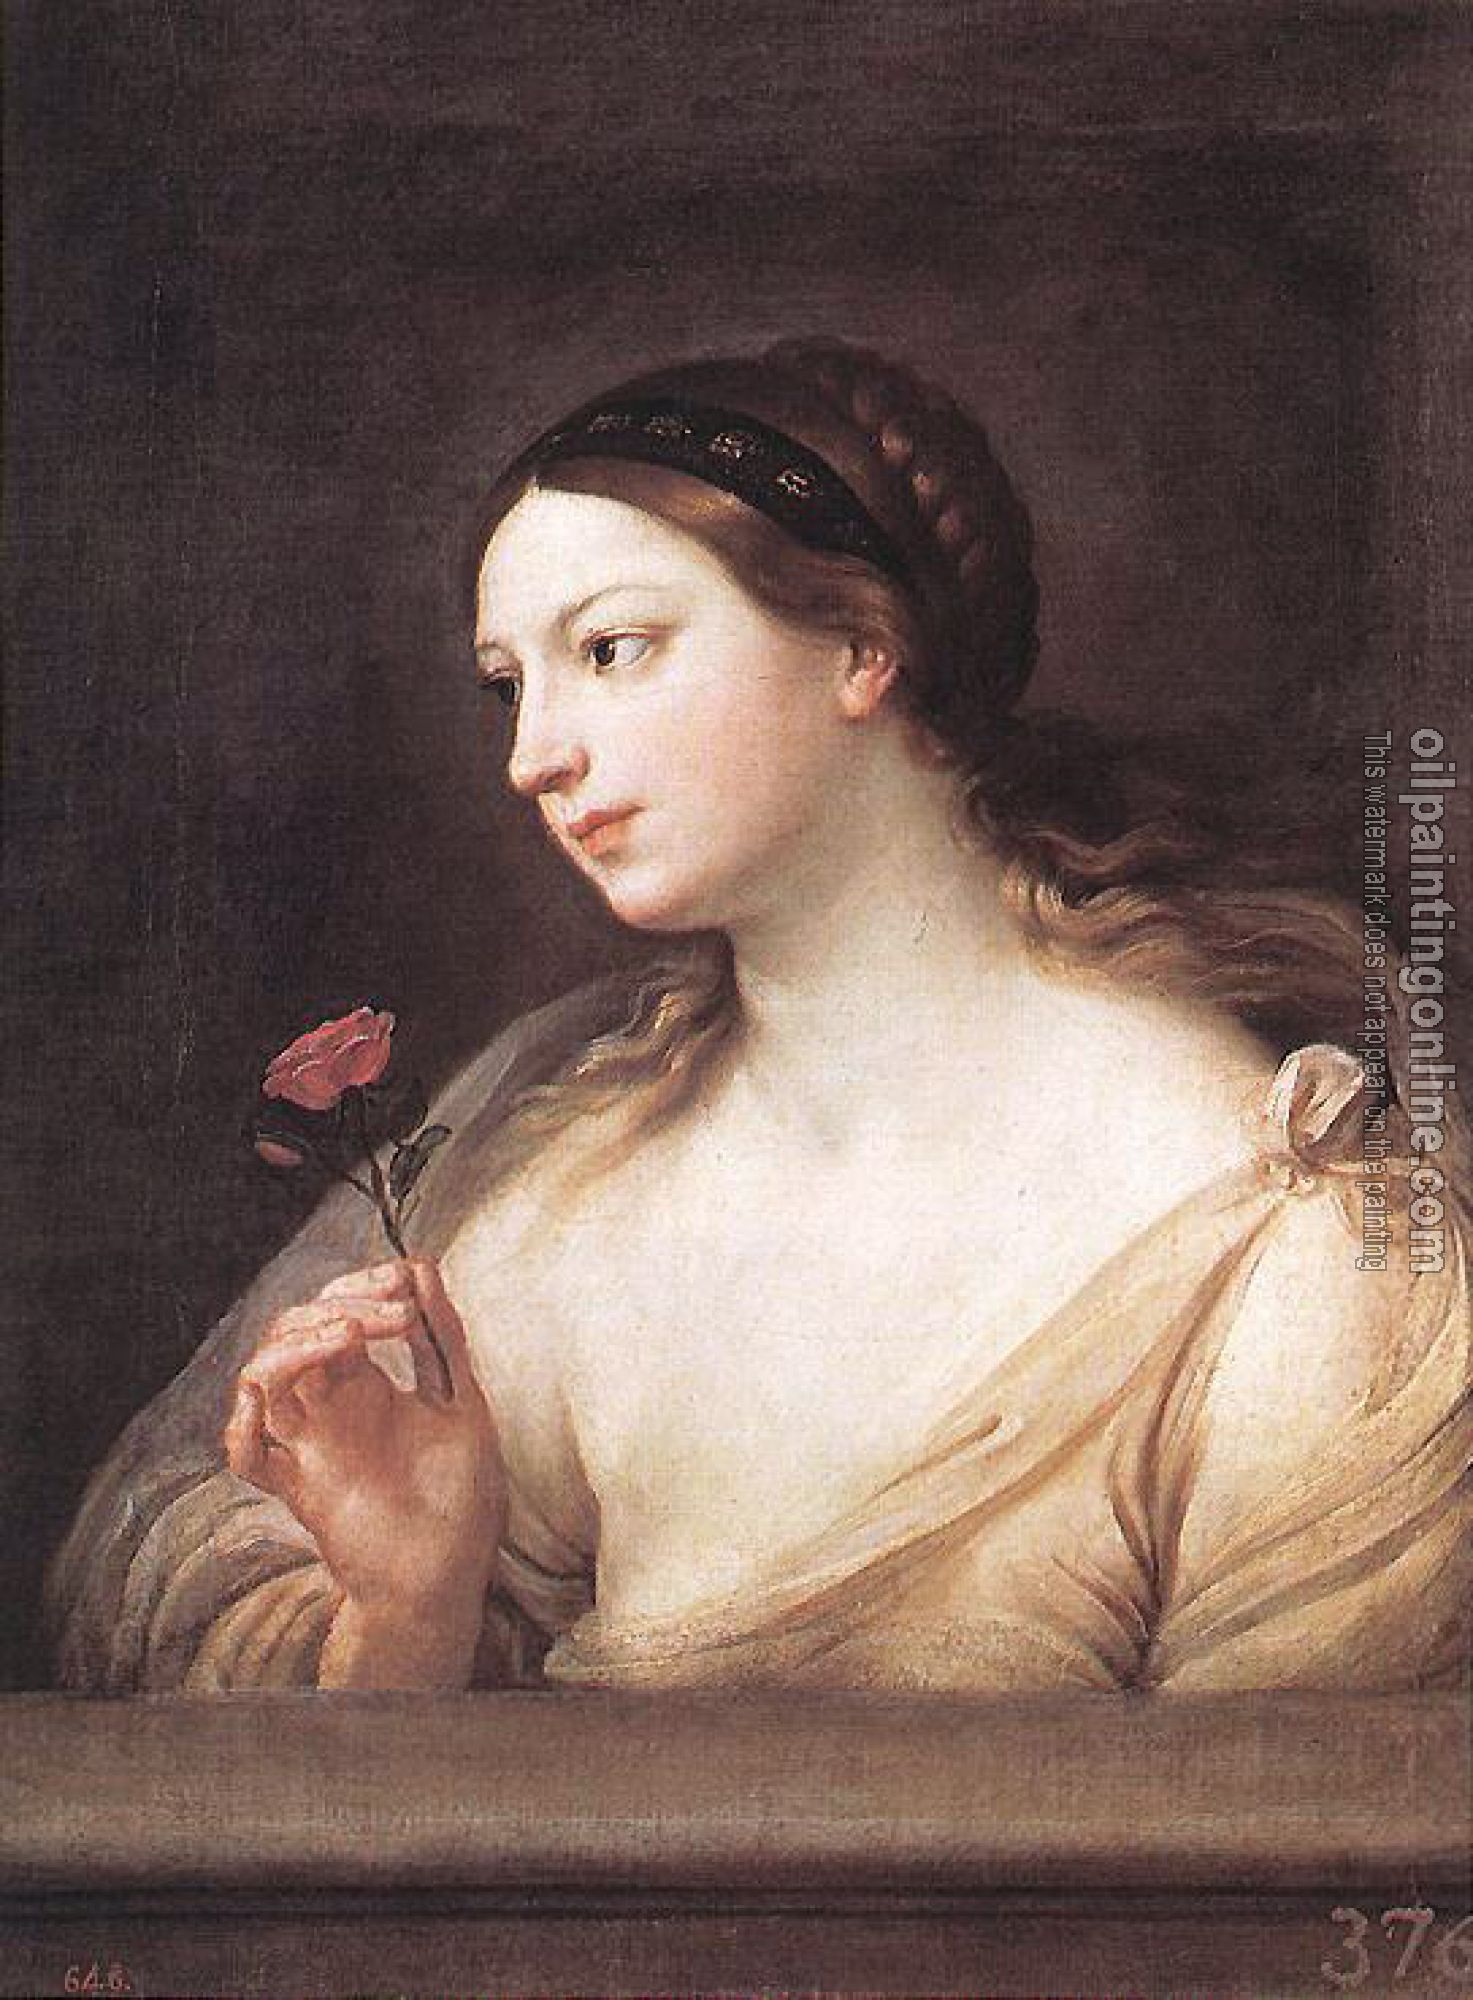 Guido Reni - Girl with a Rose